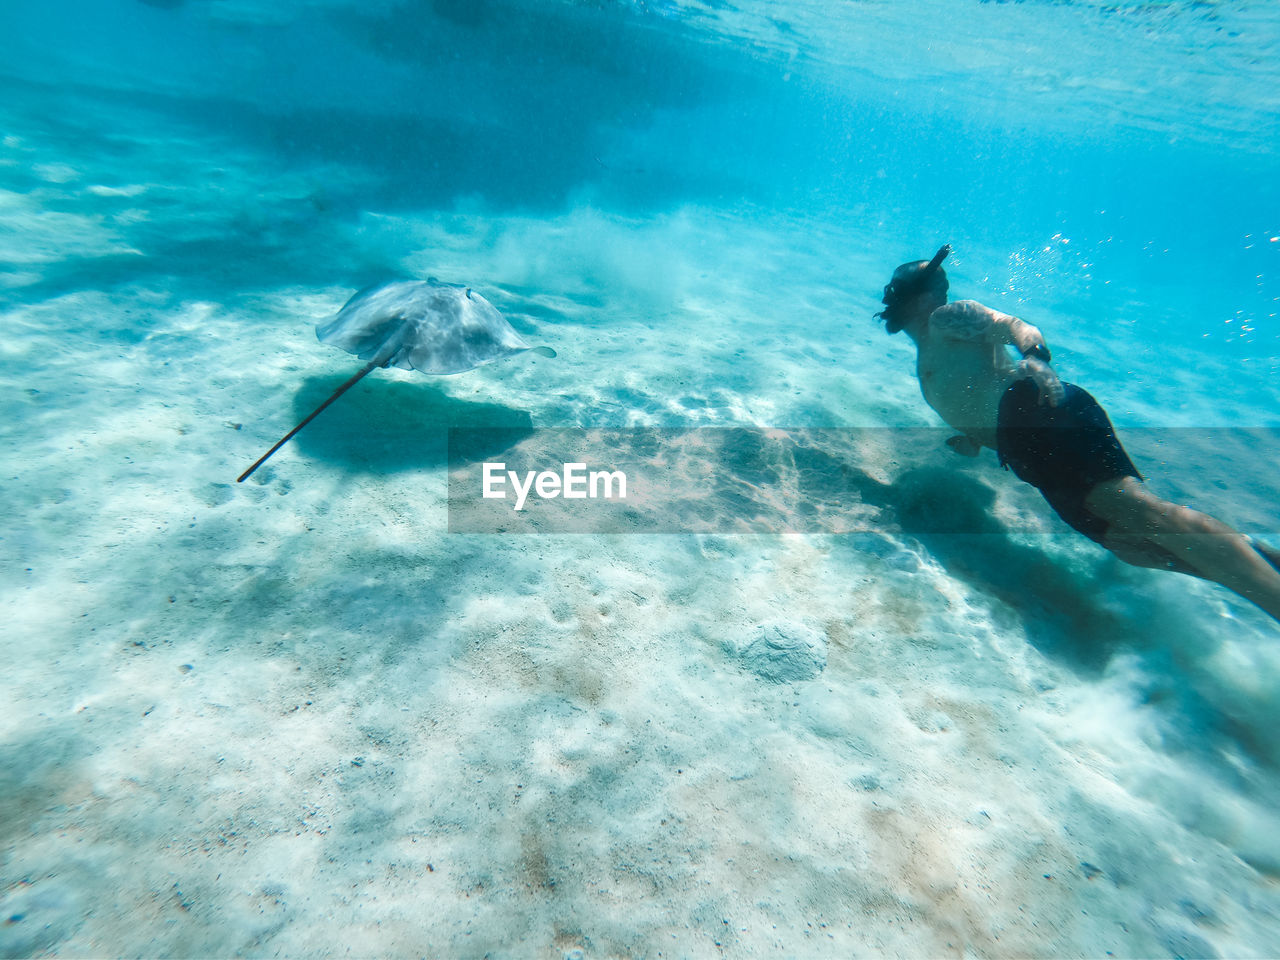 Man swimming by stingray in sea